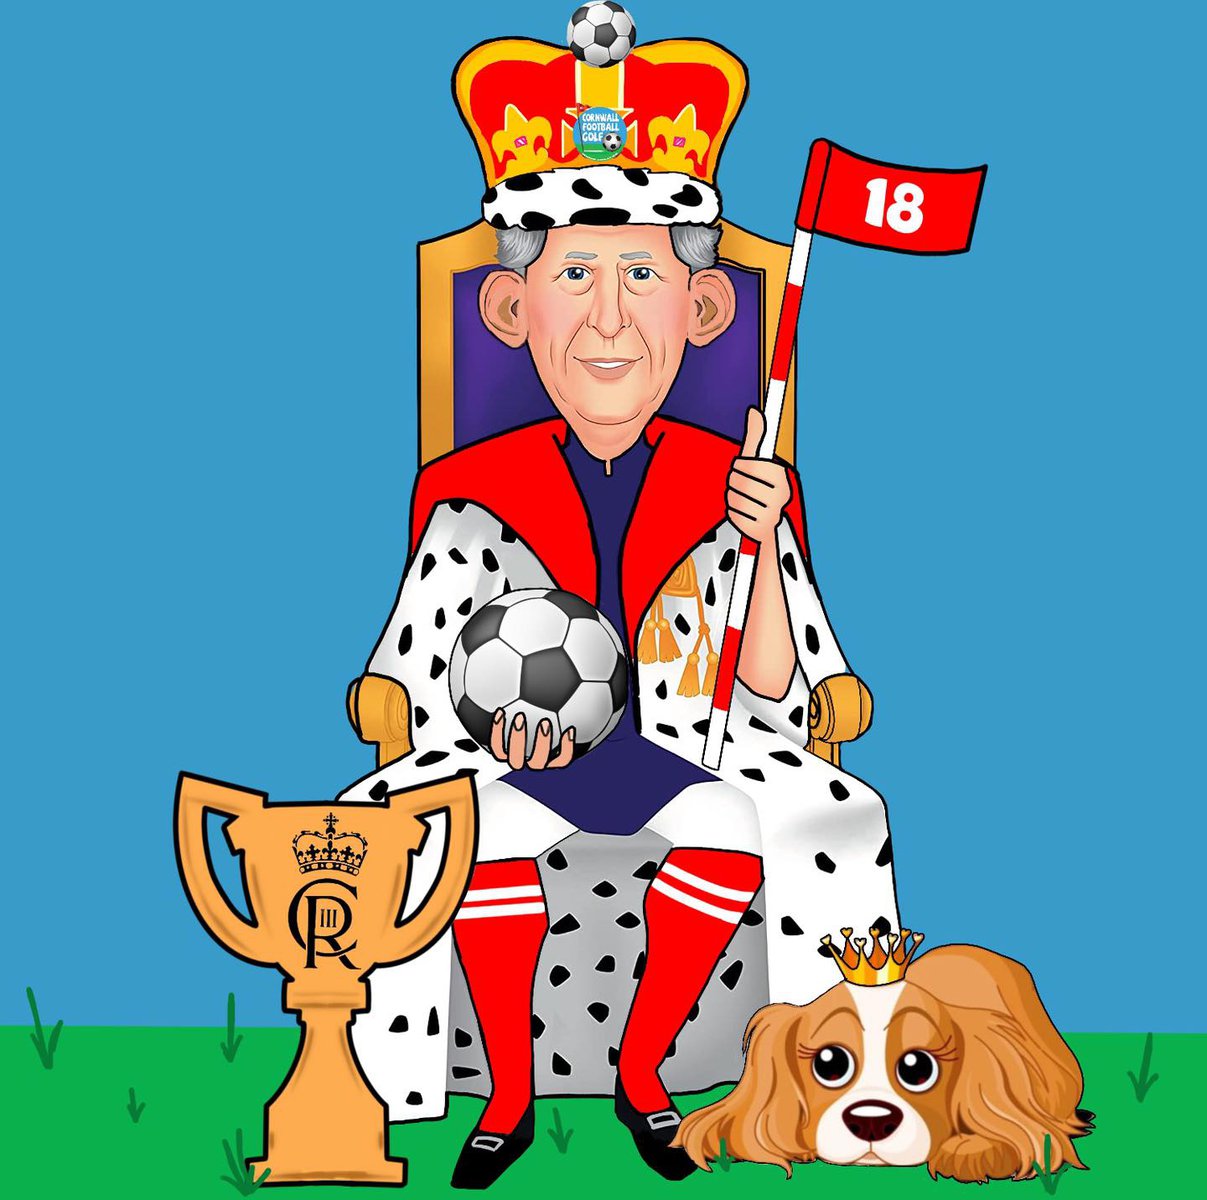 We know what King Charles would rather be doing - FootballGolf